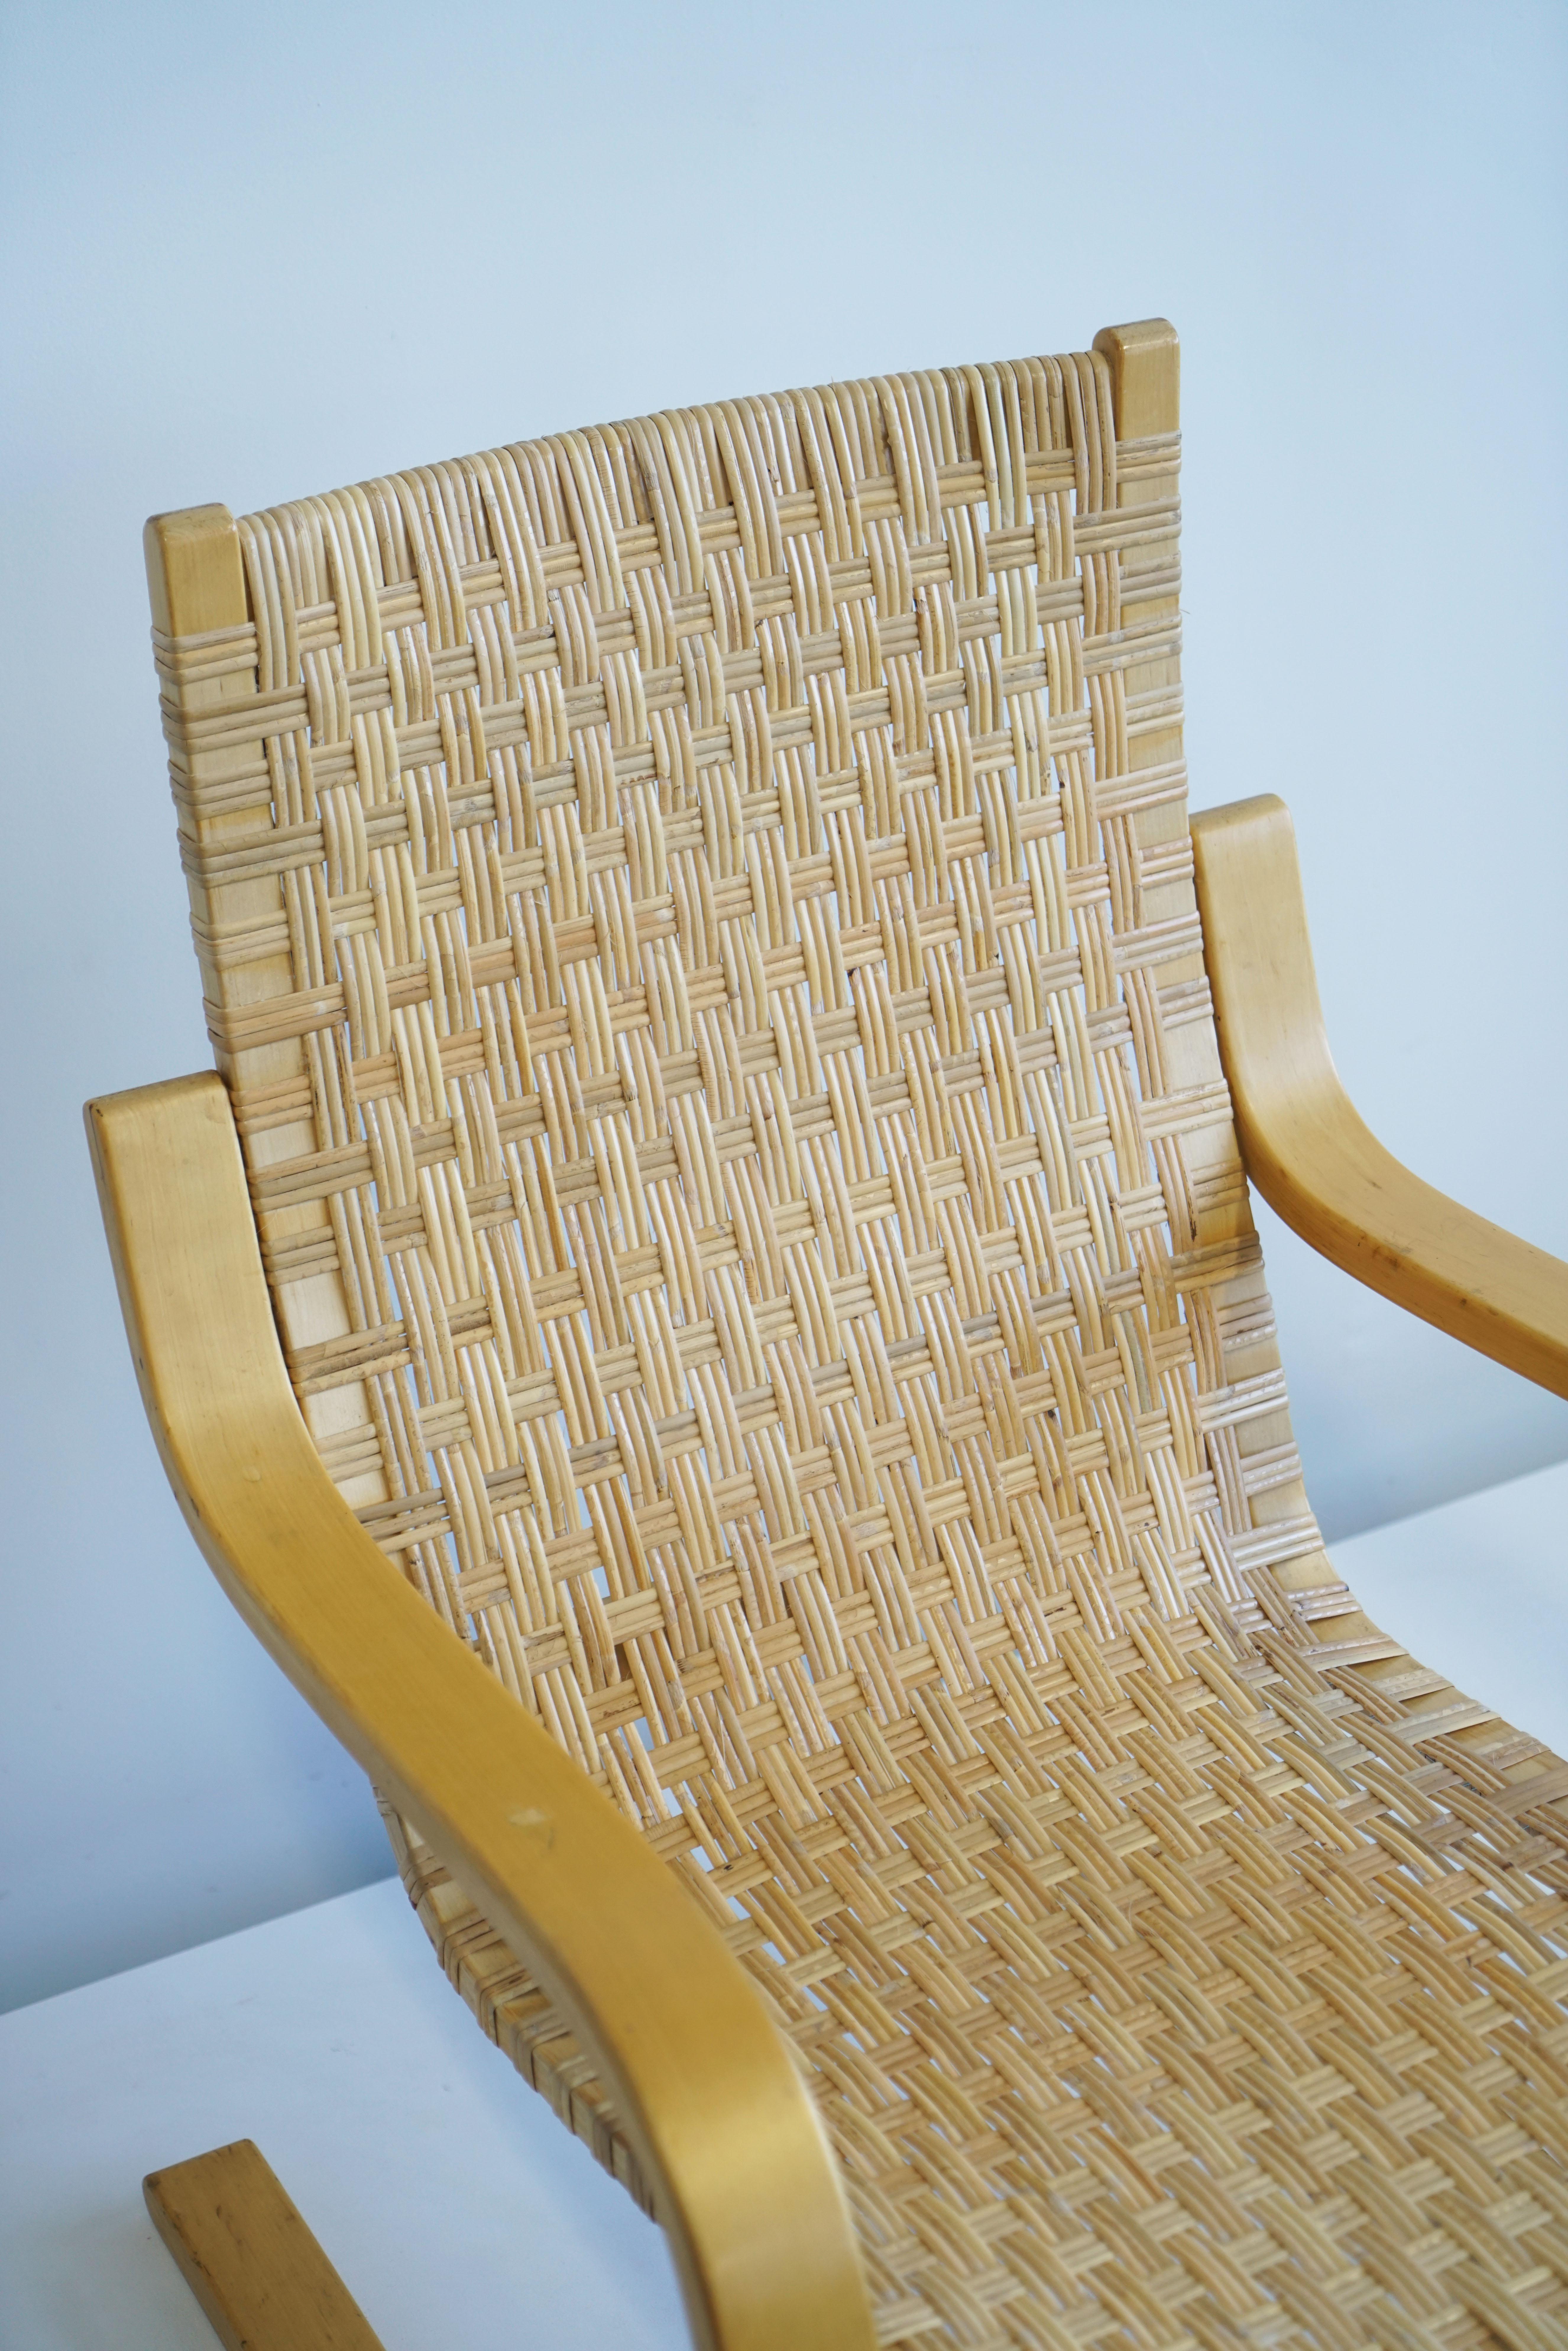 1960 Alvar Aalto Cantilever Chair Model 406 by Artek in Birch and Cane Webbing For Sale 4